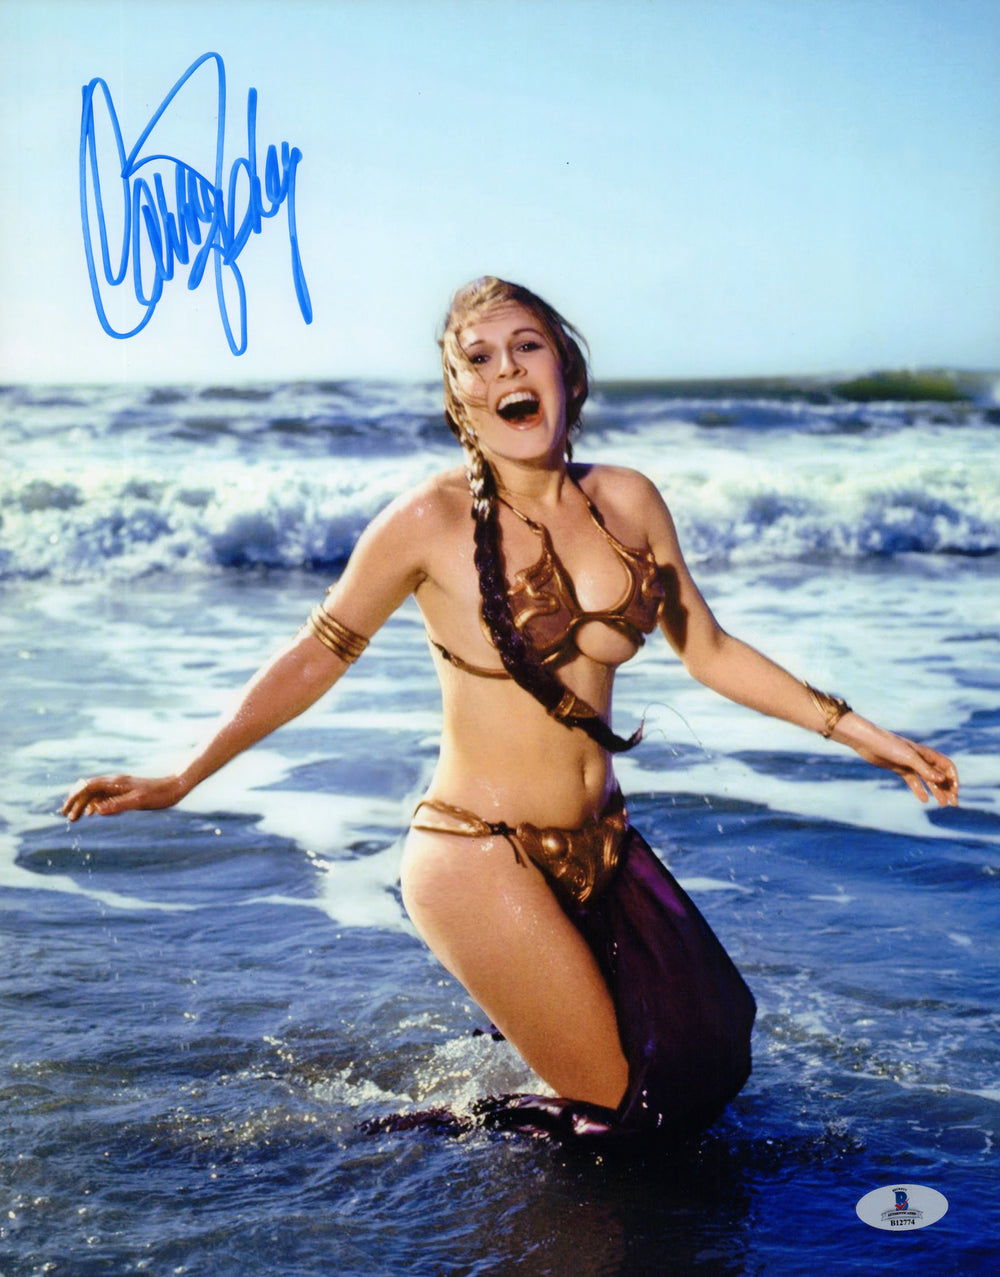 Carrie Fisher as Princess Leia in Star Wars: Return of the Jedi Signed Rolling Stone Beach Shot 11x14 Photo